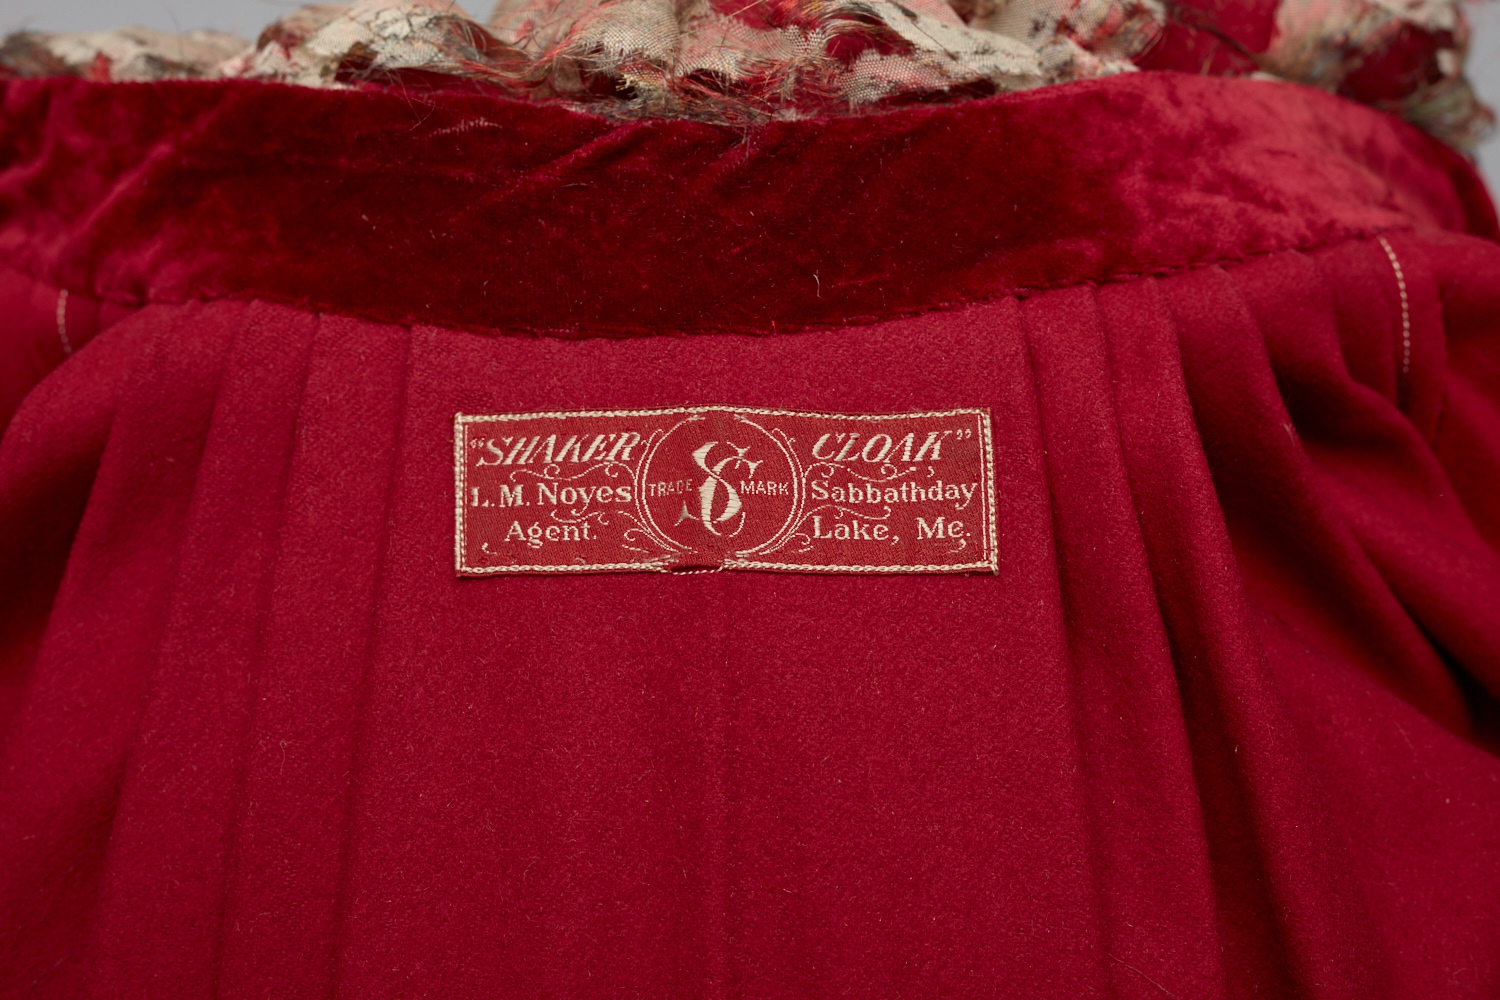 A red velvet dress with a label on it.